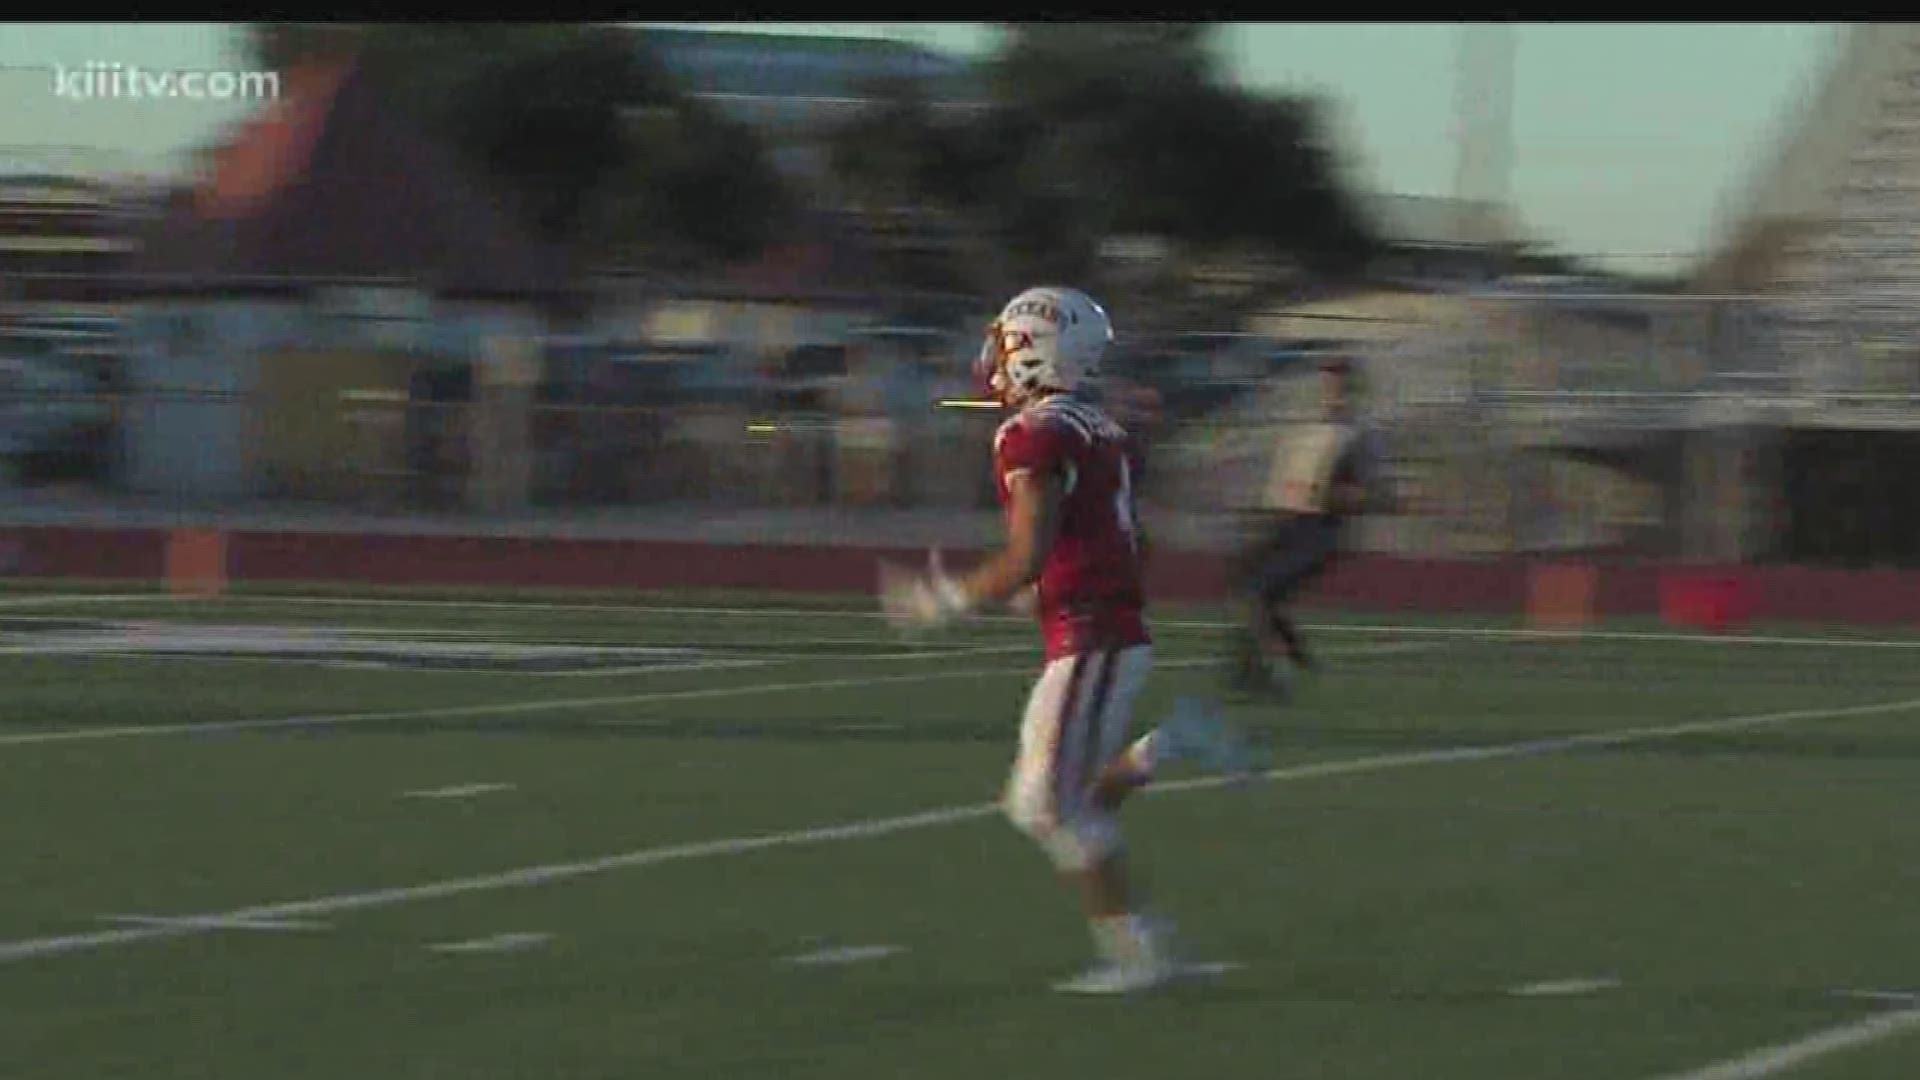 Our Play of the Week for week 1 of the Blitz belongs to the Ray Texans' Joseph Calero.